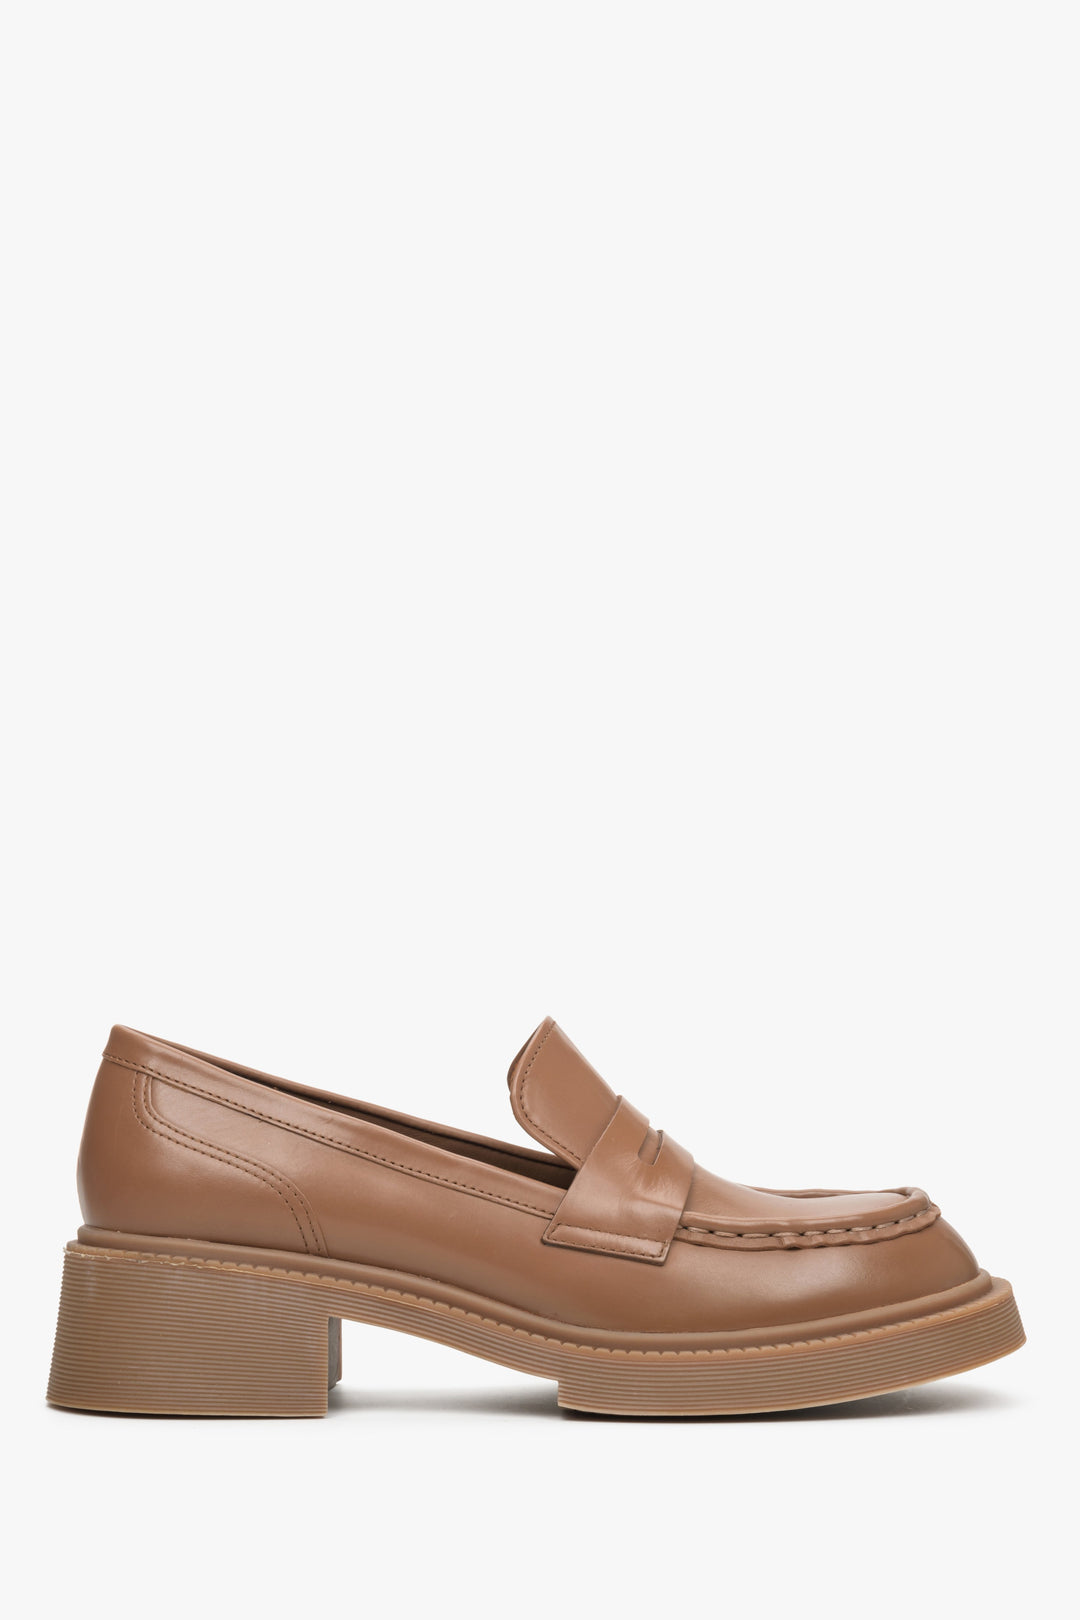 Women's brown moccasins with stable heel made of genuine Leather by Estro.